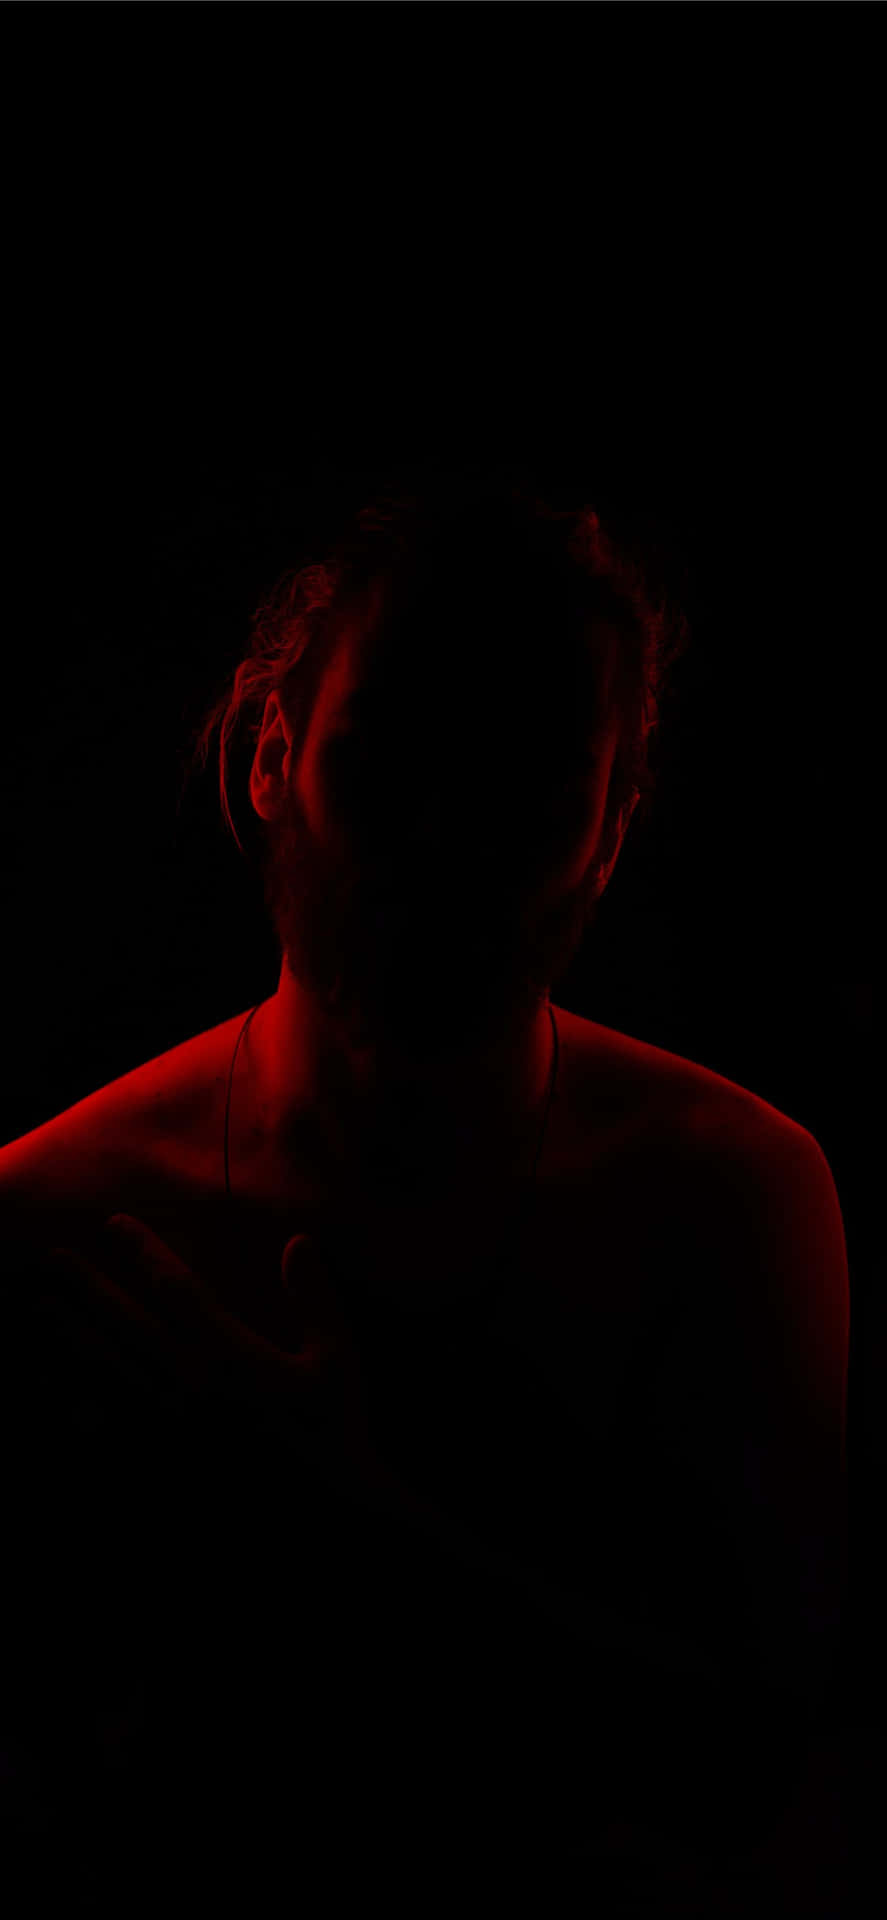 Man On A Somber Night With Red Light Wallpaper